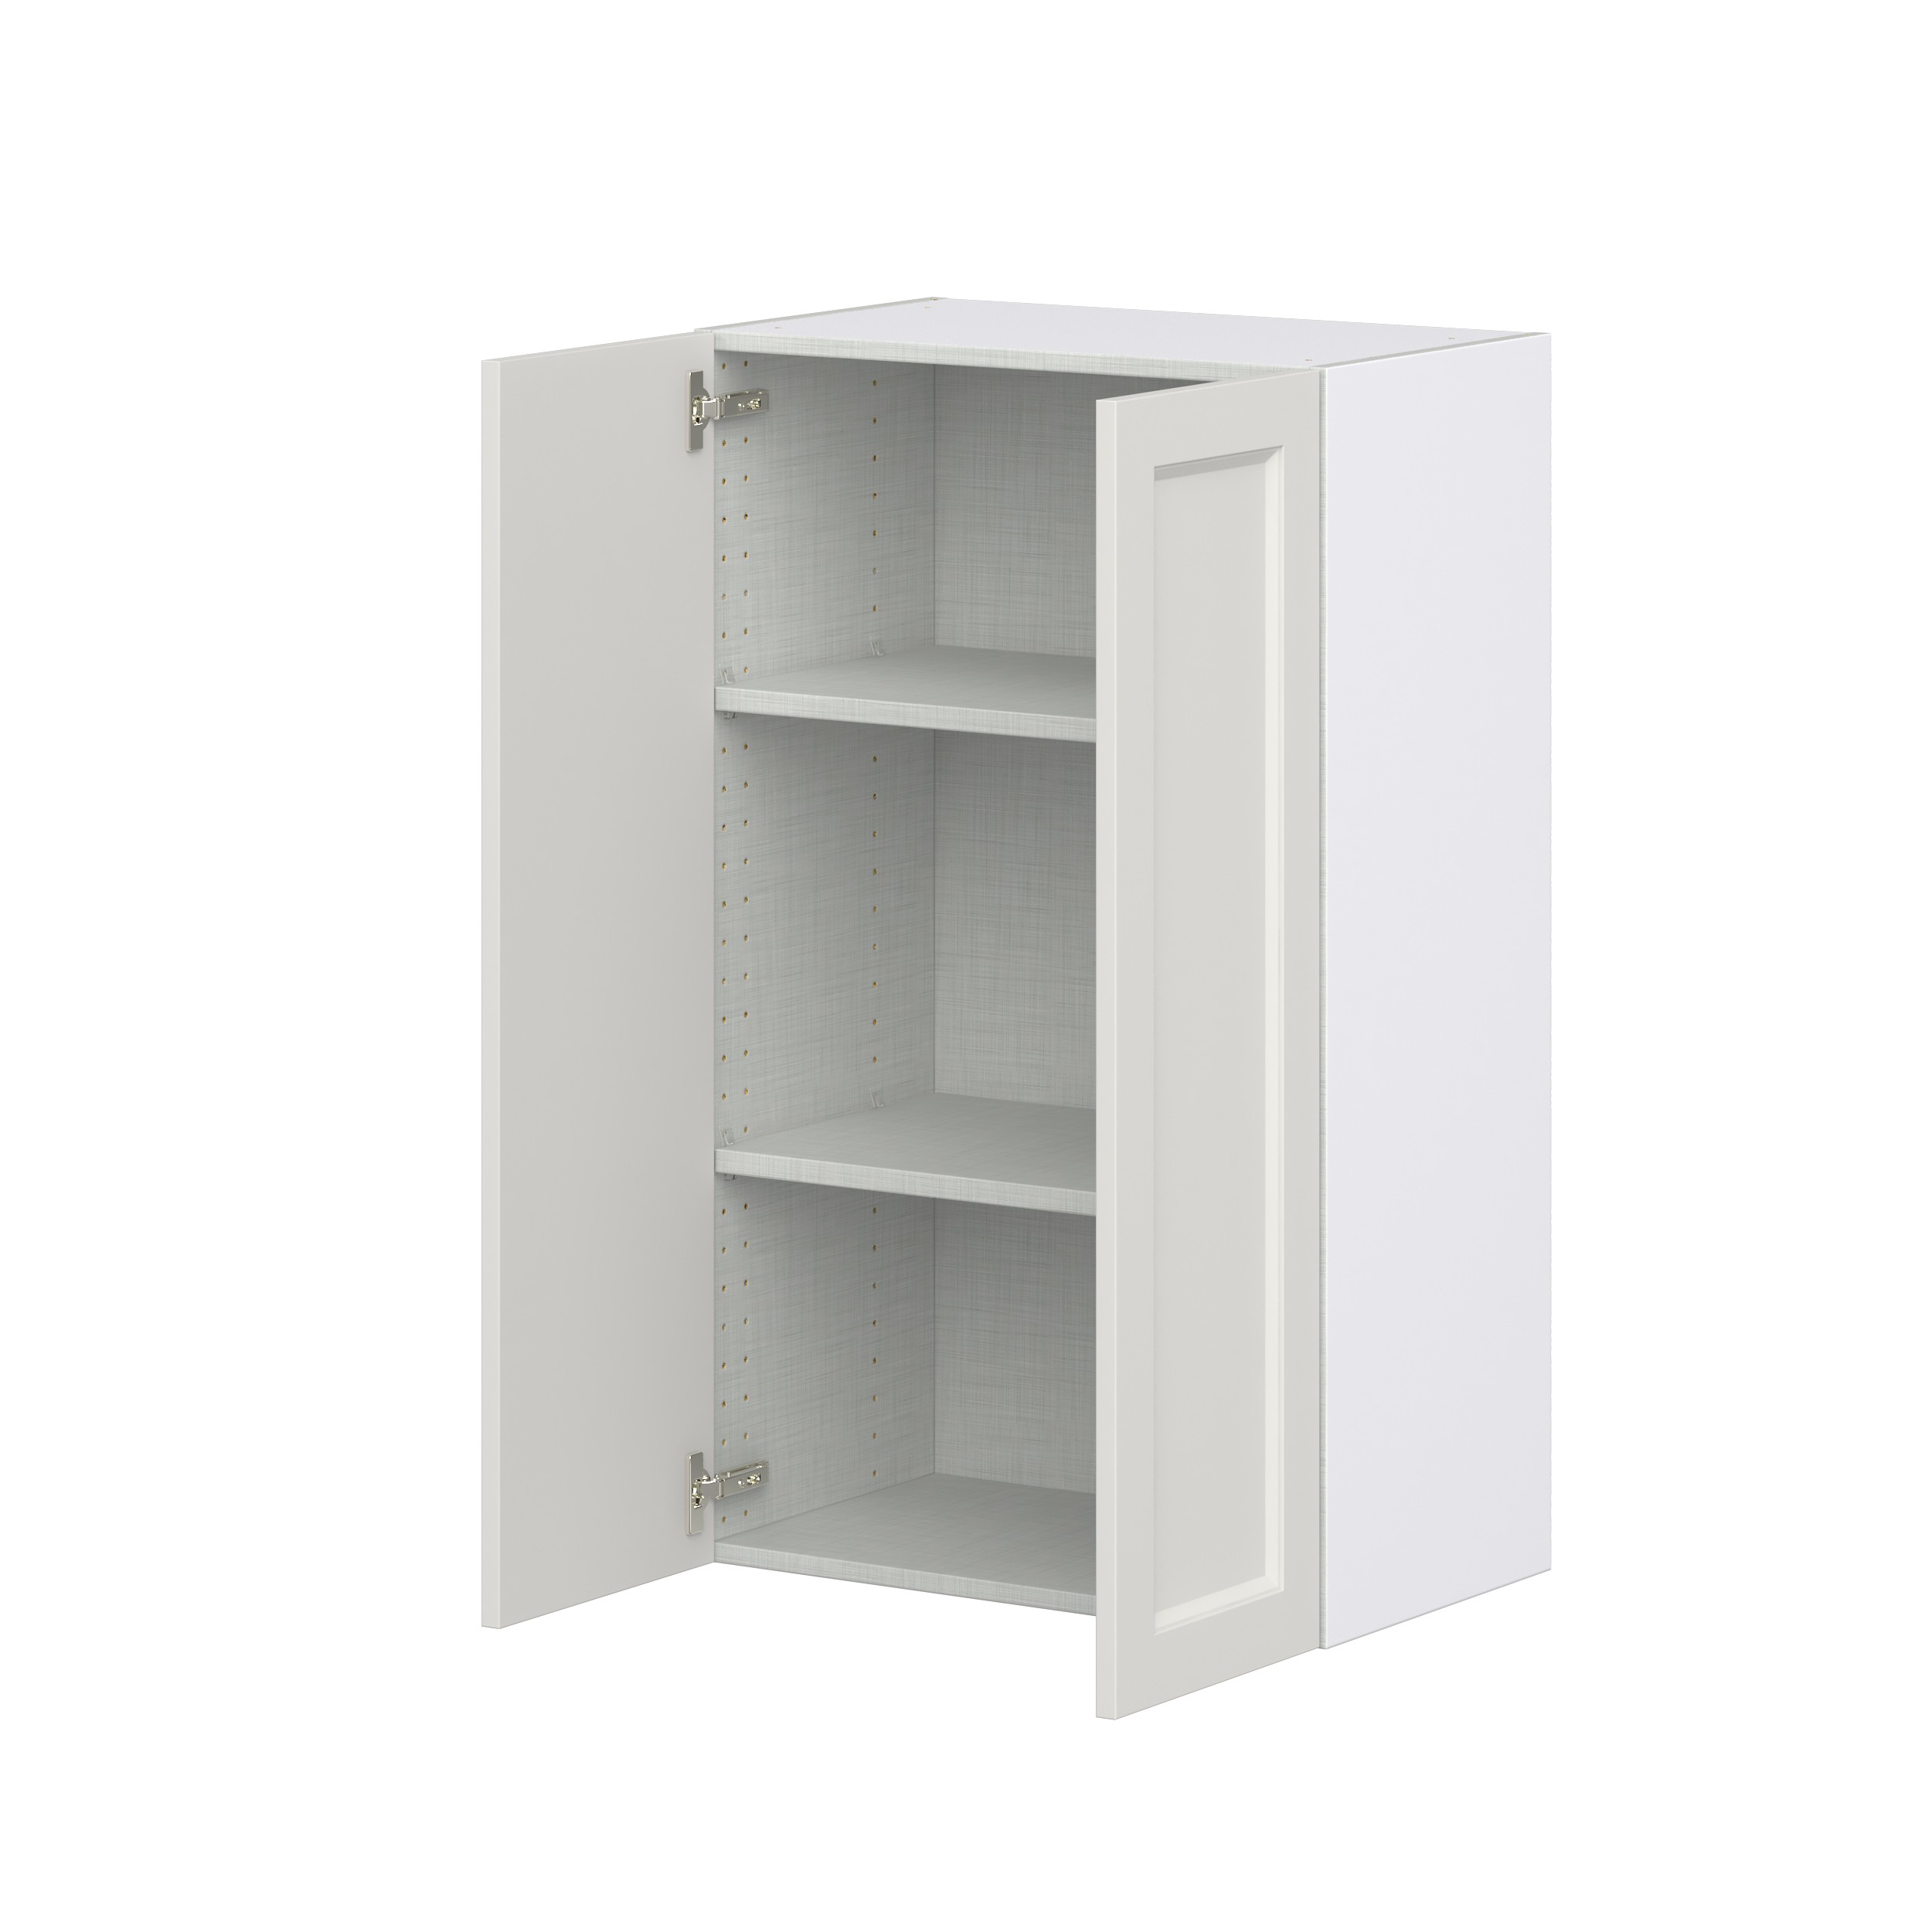 Wisteria Painted Light Gray Recessed Assembled Wall Cabinet with 2 Full High Doors (24 in. W x 40 in. H x 14 in. D)